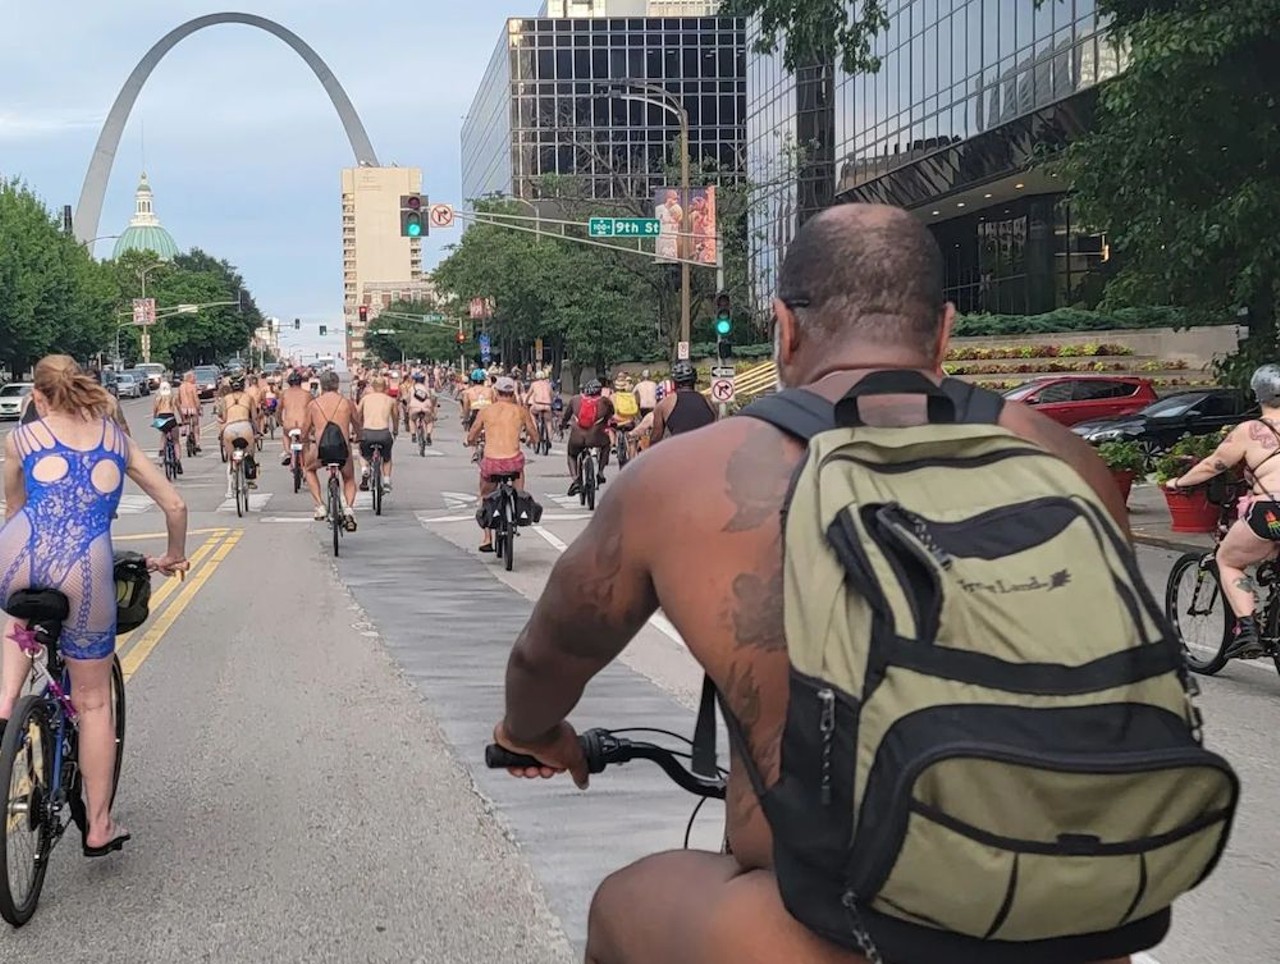  Kage Black, at the World Naked Bike Ride, saw his butt go viral in August.